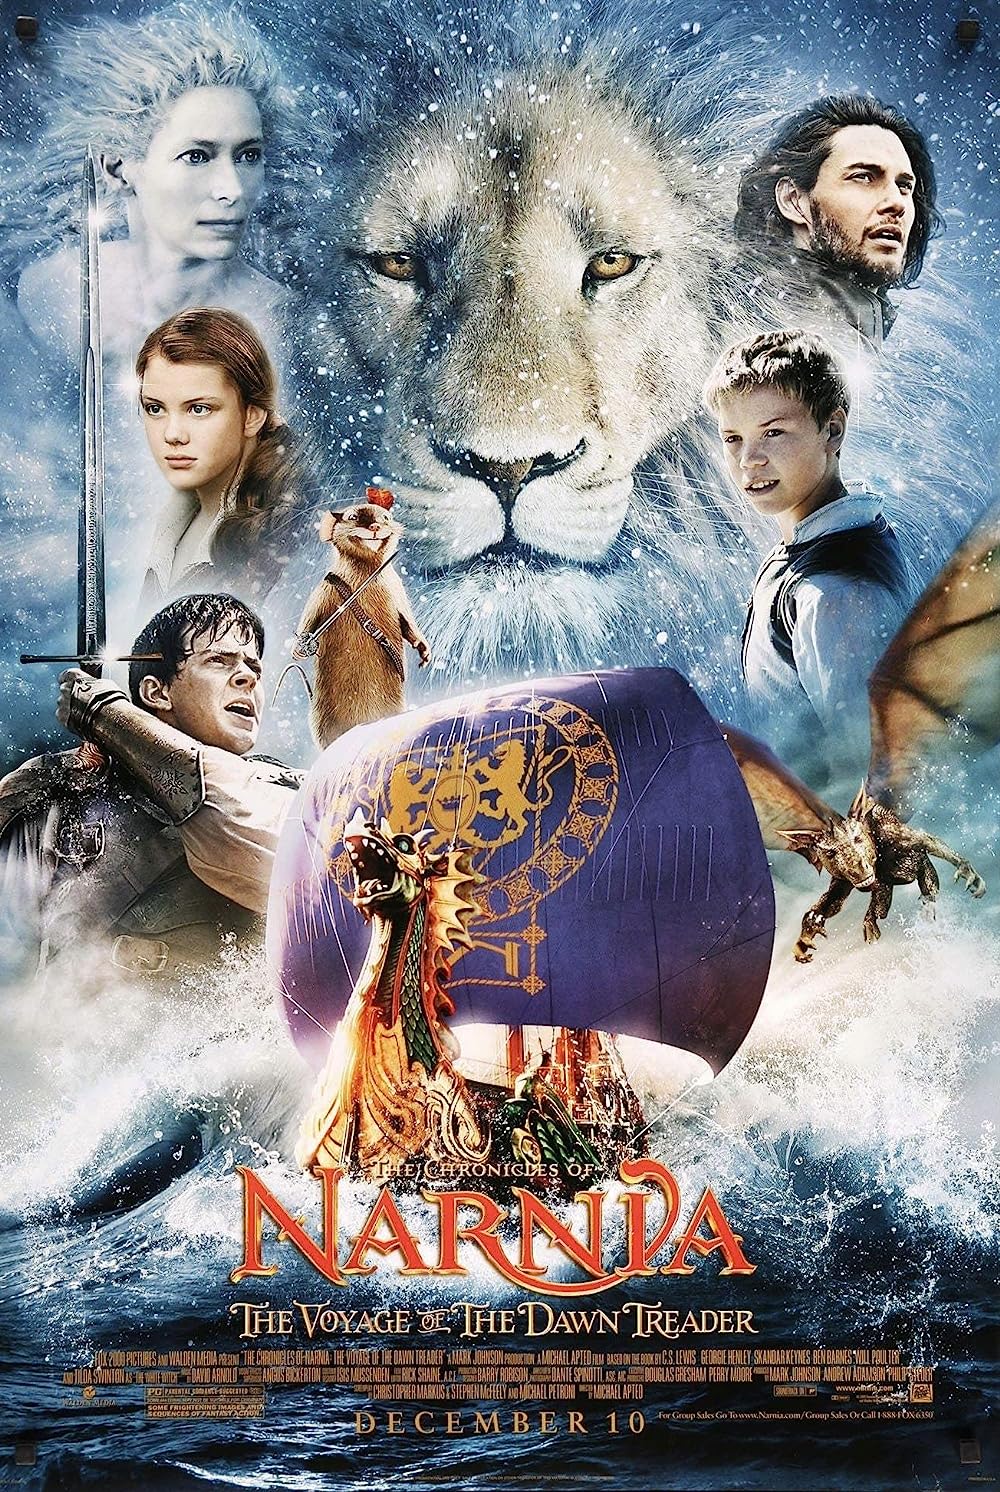 The Chronicles of Narnia The Voyage of the Dawn Treader 2010 Hindi Dual Audio 720p BluRay 1.1GB ESub Download